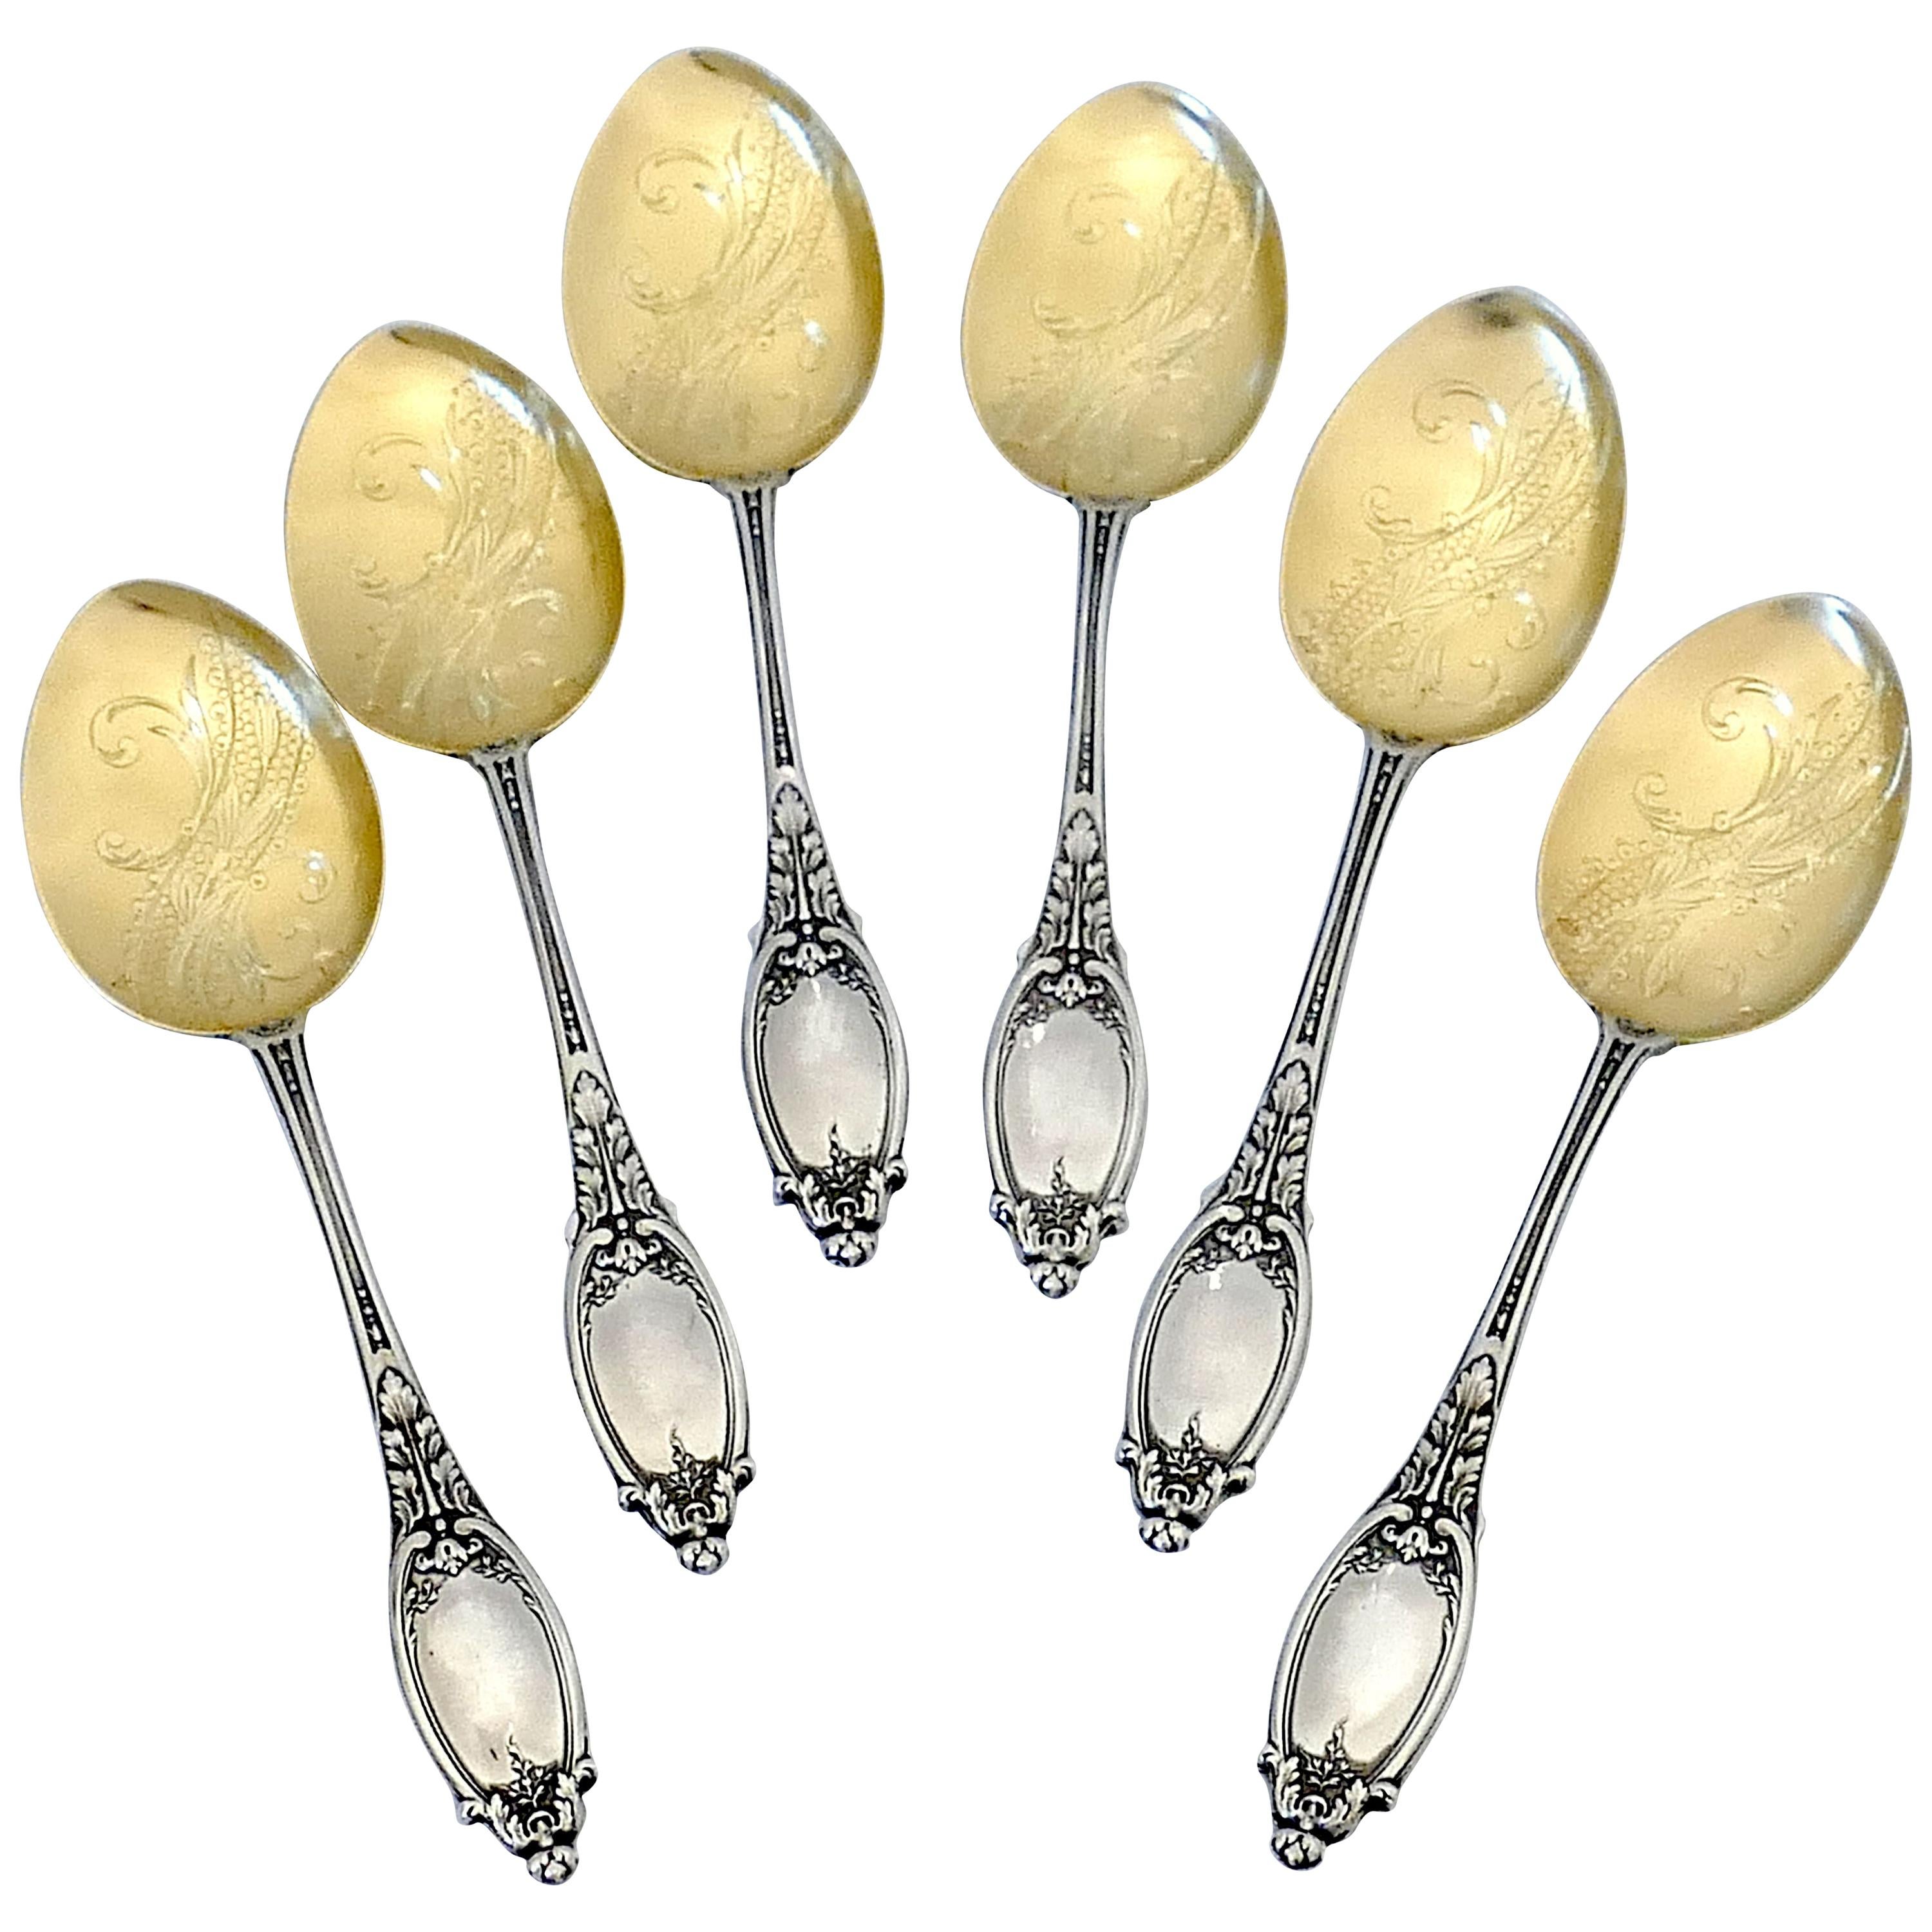 Maillard French Sterling Silver 18-Karat Gold Ice Cream Spoons Set 6 Pc For Sale